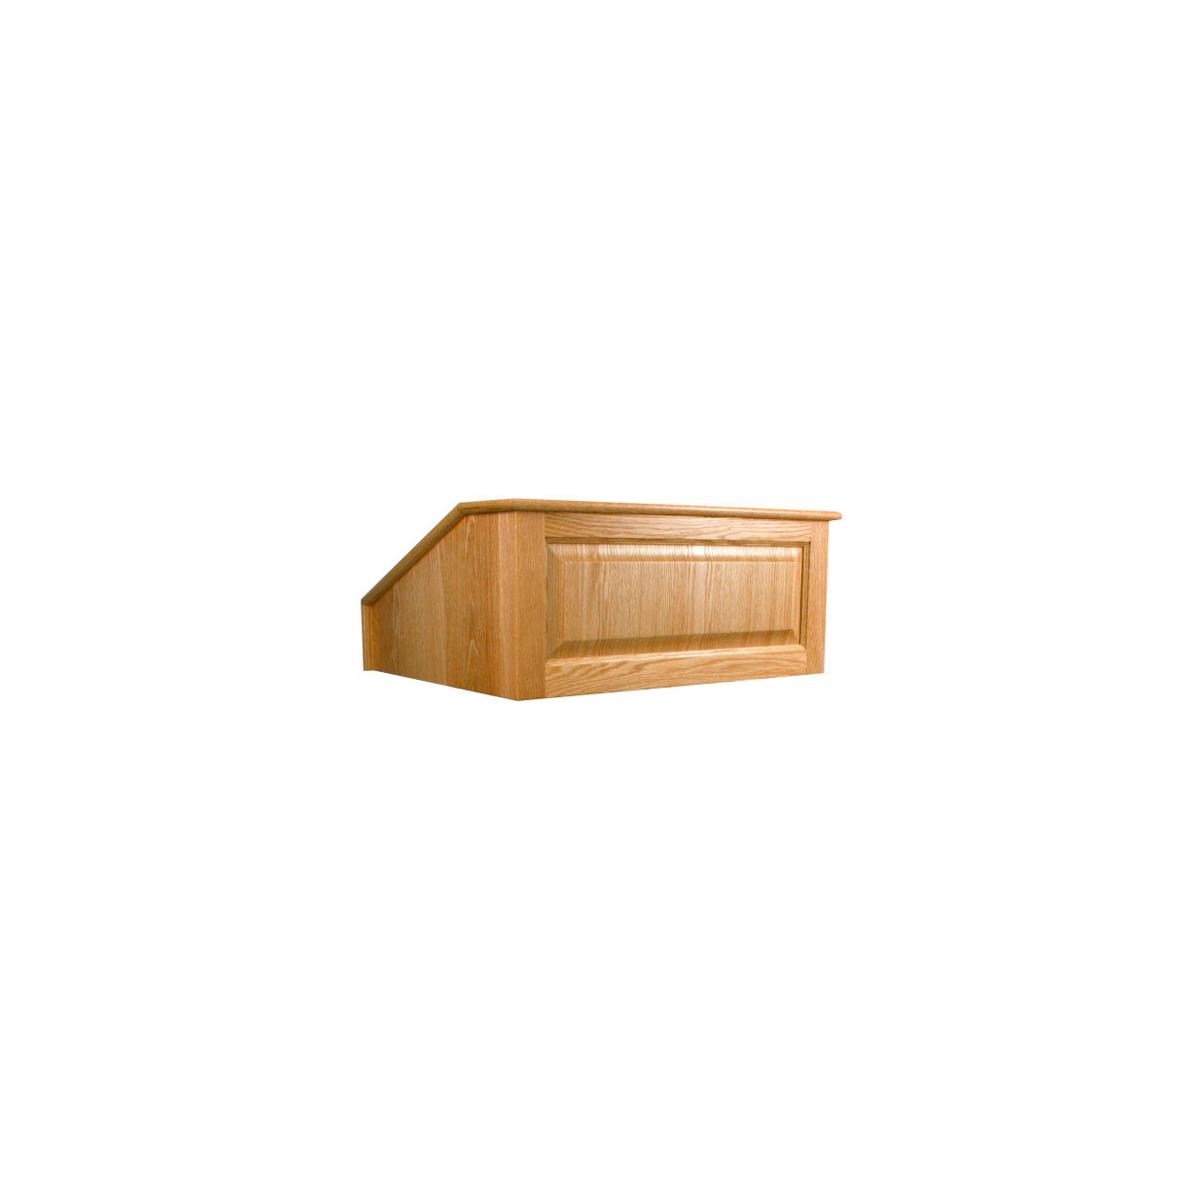 

AmpliVox Amplivox SN3020-OK Victoria Tabletop Lectern without Sound - Natural Oak